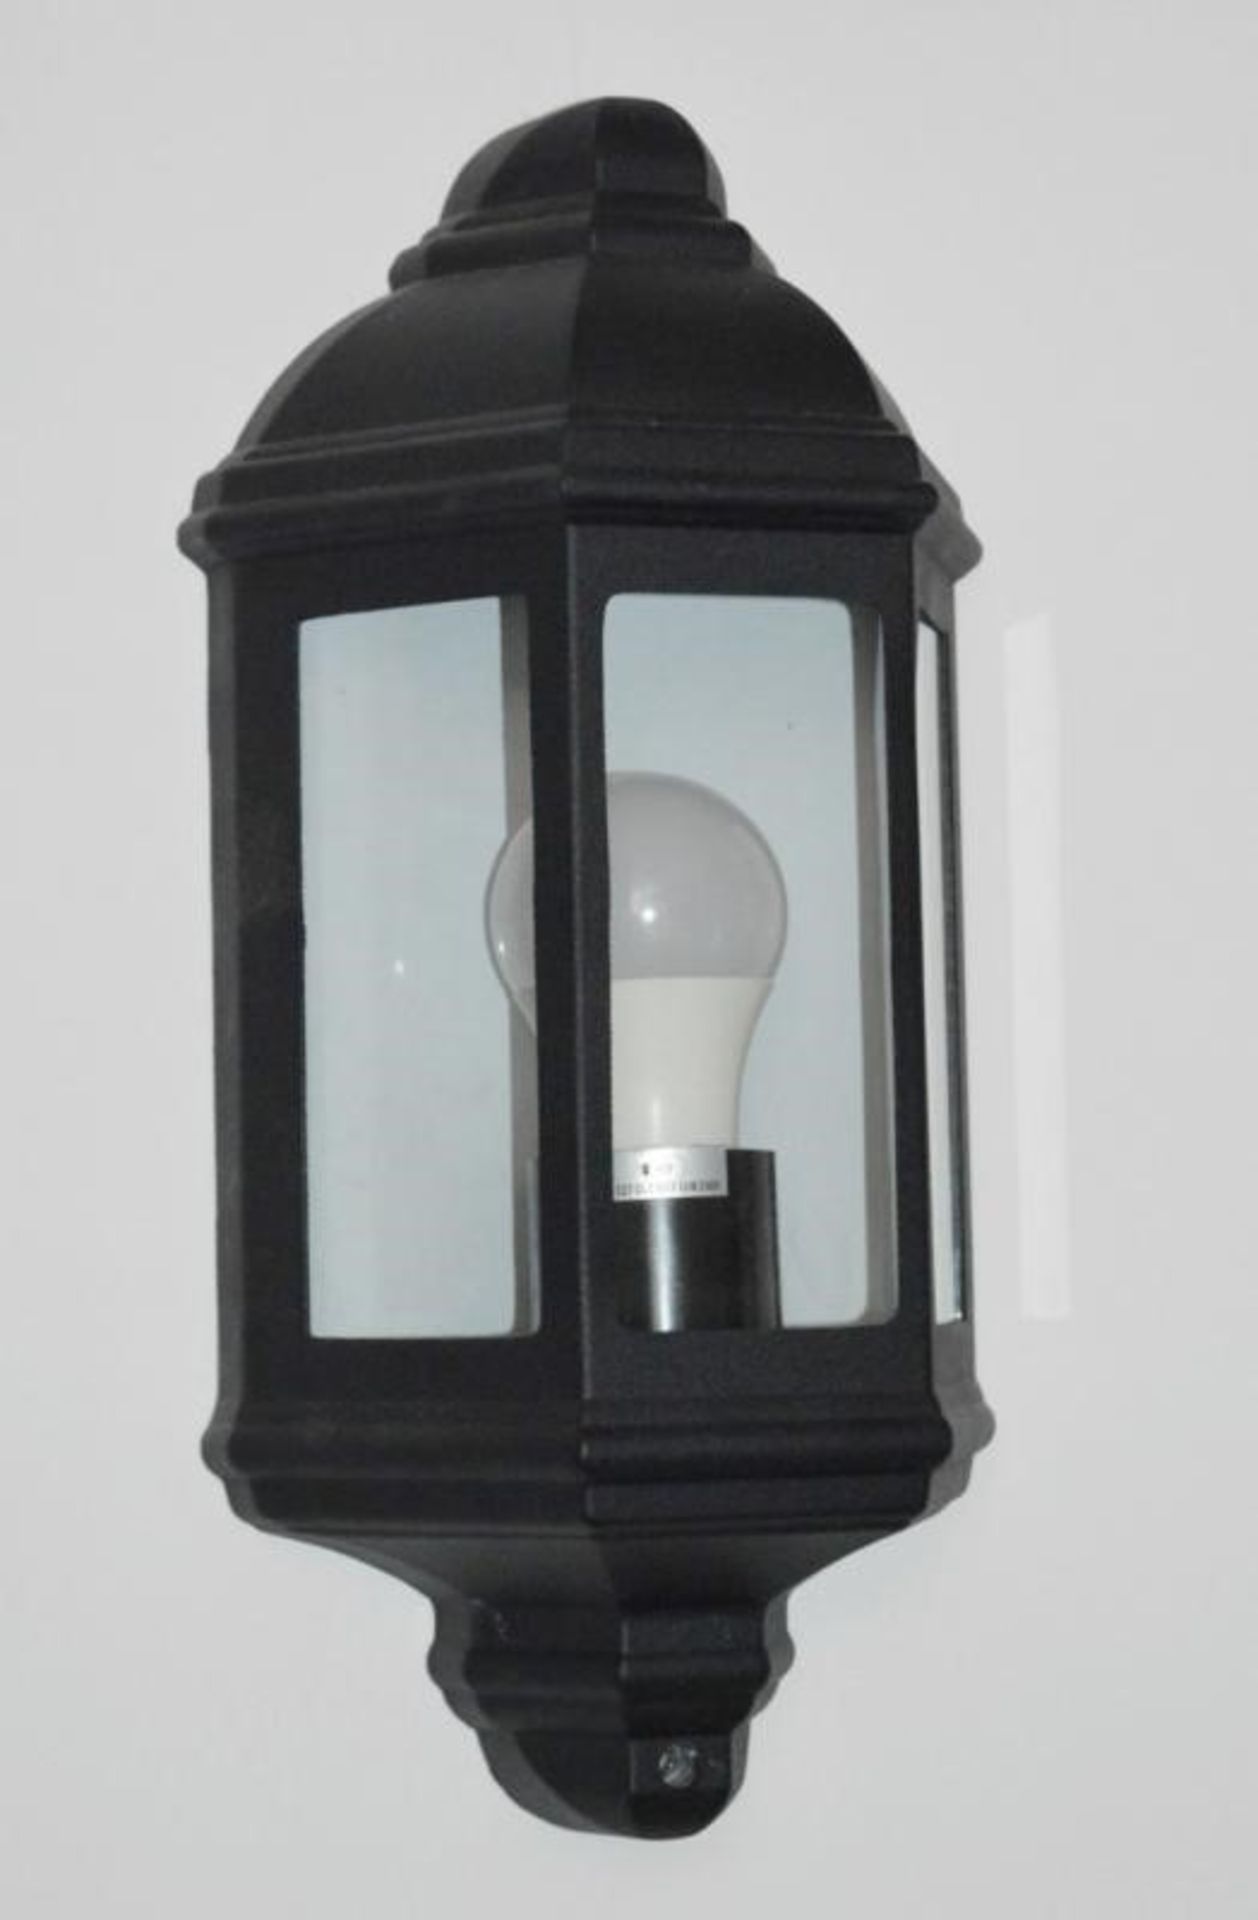 1 x Bel Aire Aluminium Ip44 Black Outdoor Wall Light, Clear Glass (14318) - Ex Display Stock - CL298 - Image 2 of 2